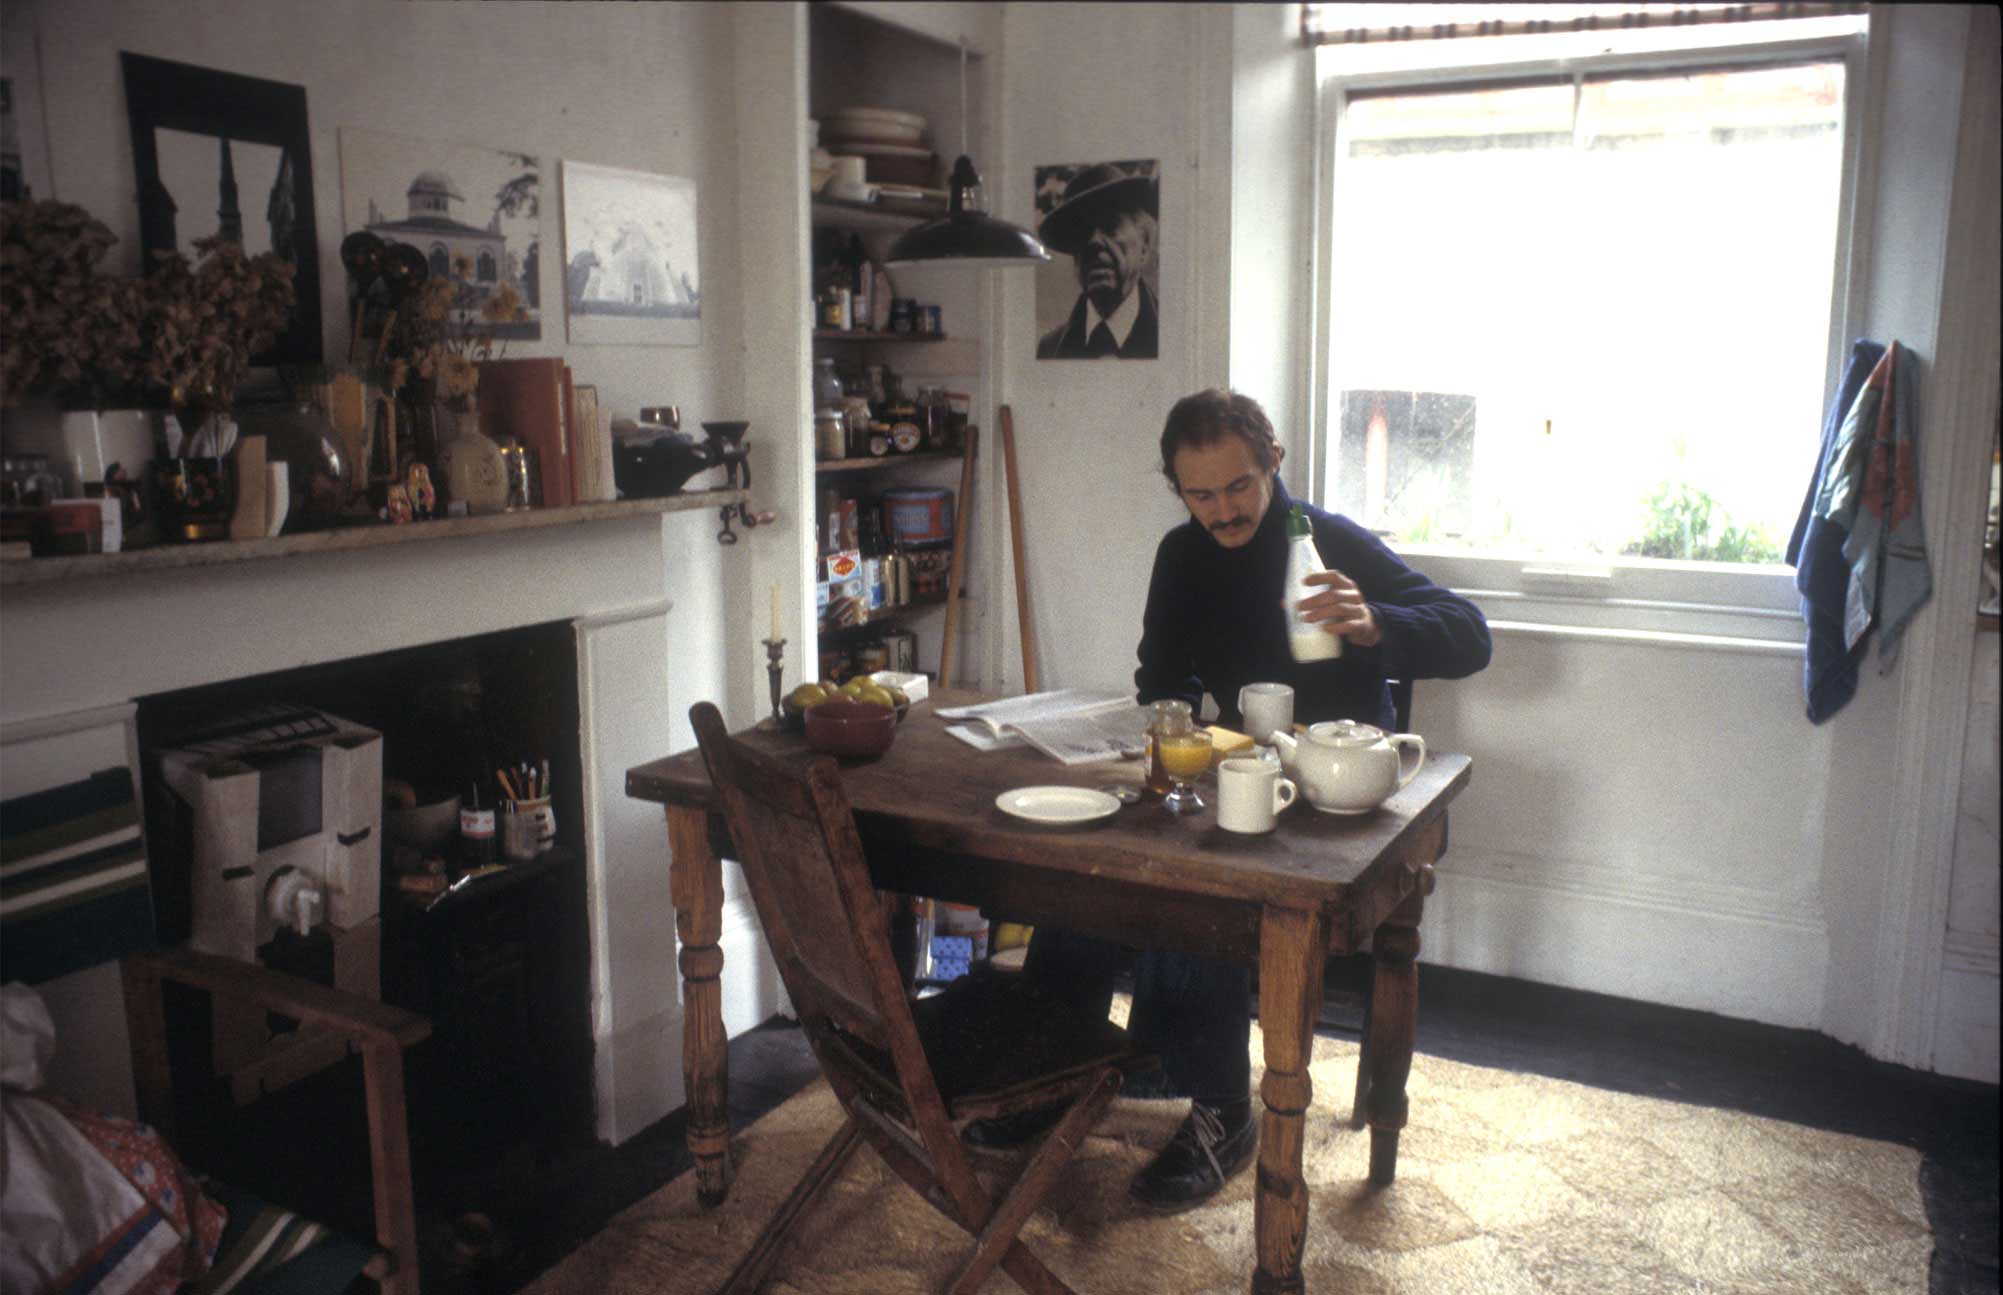 Breakfast in the kitchen at 10 Tolmers Square, 1978